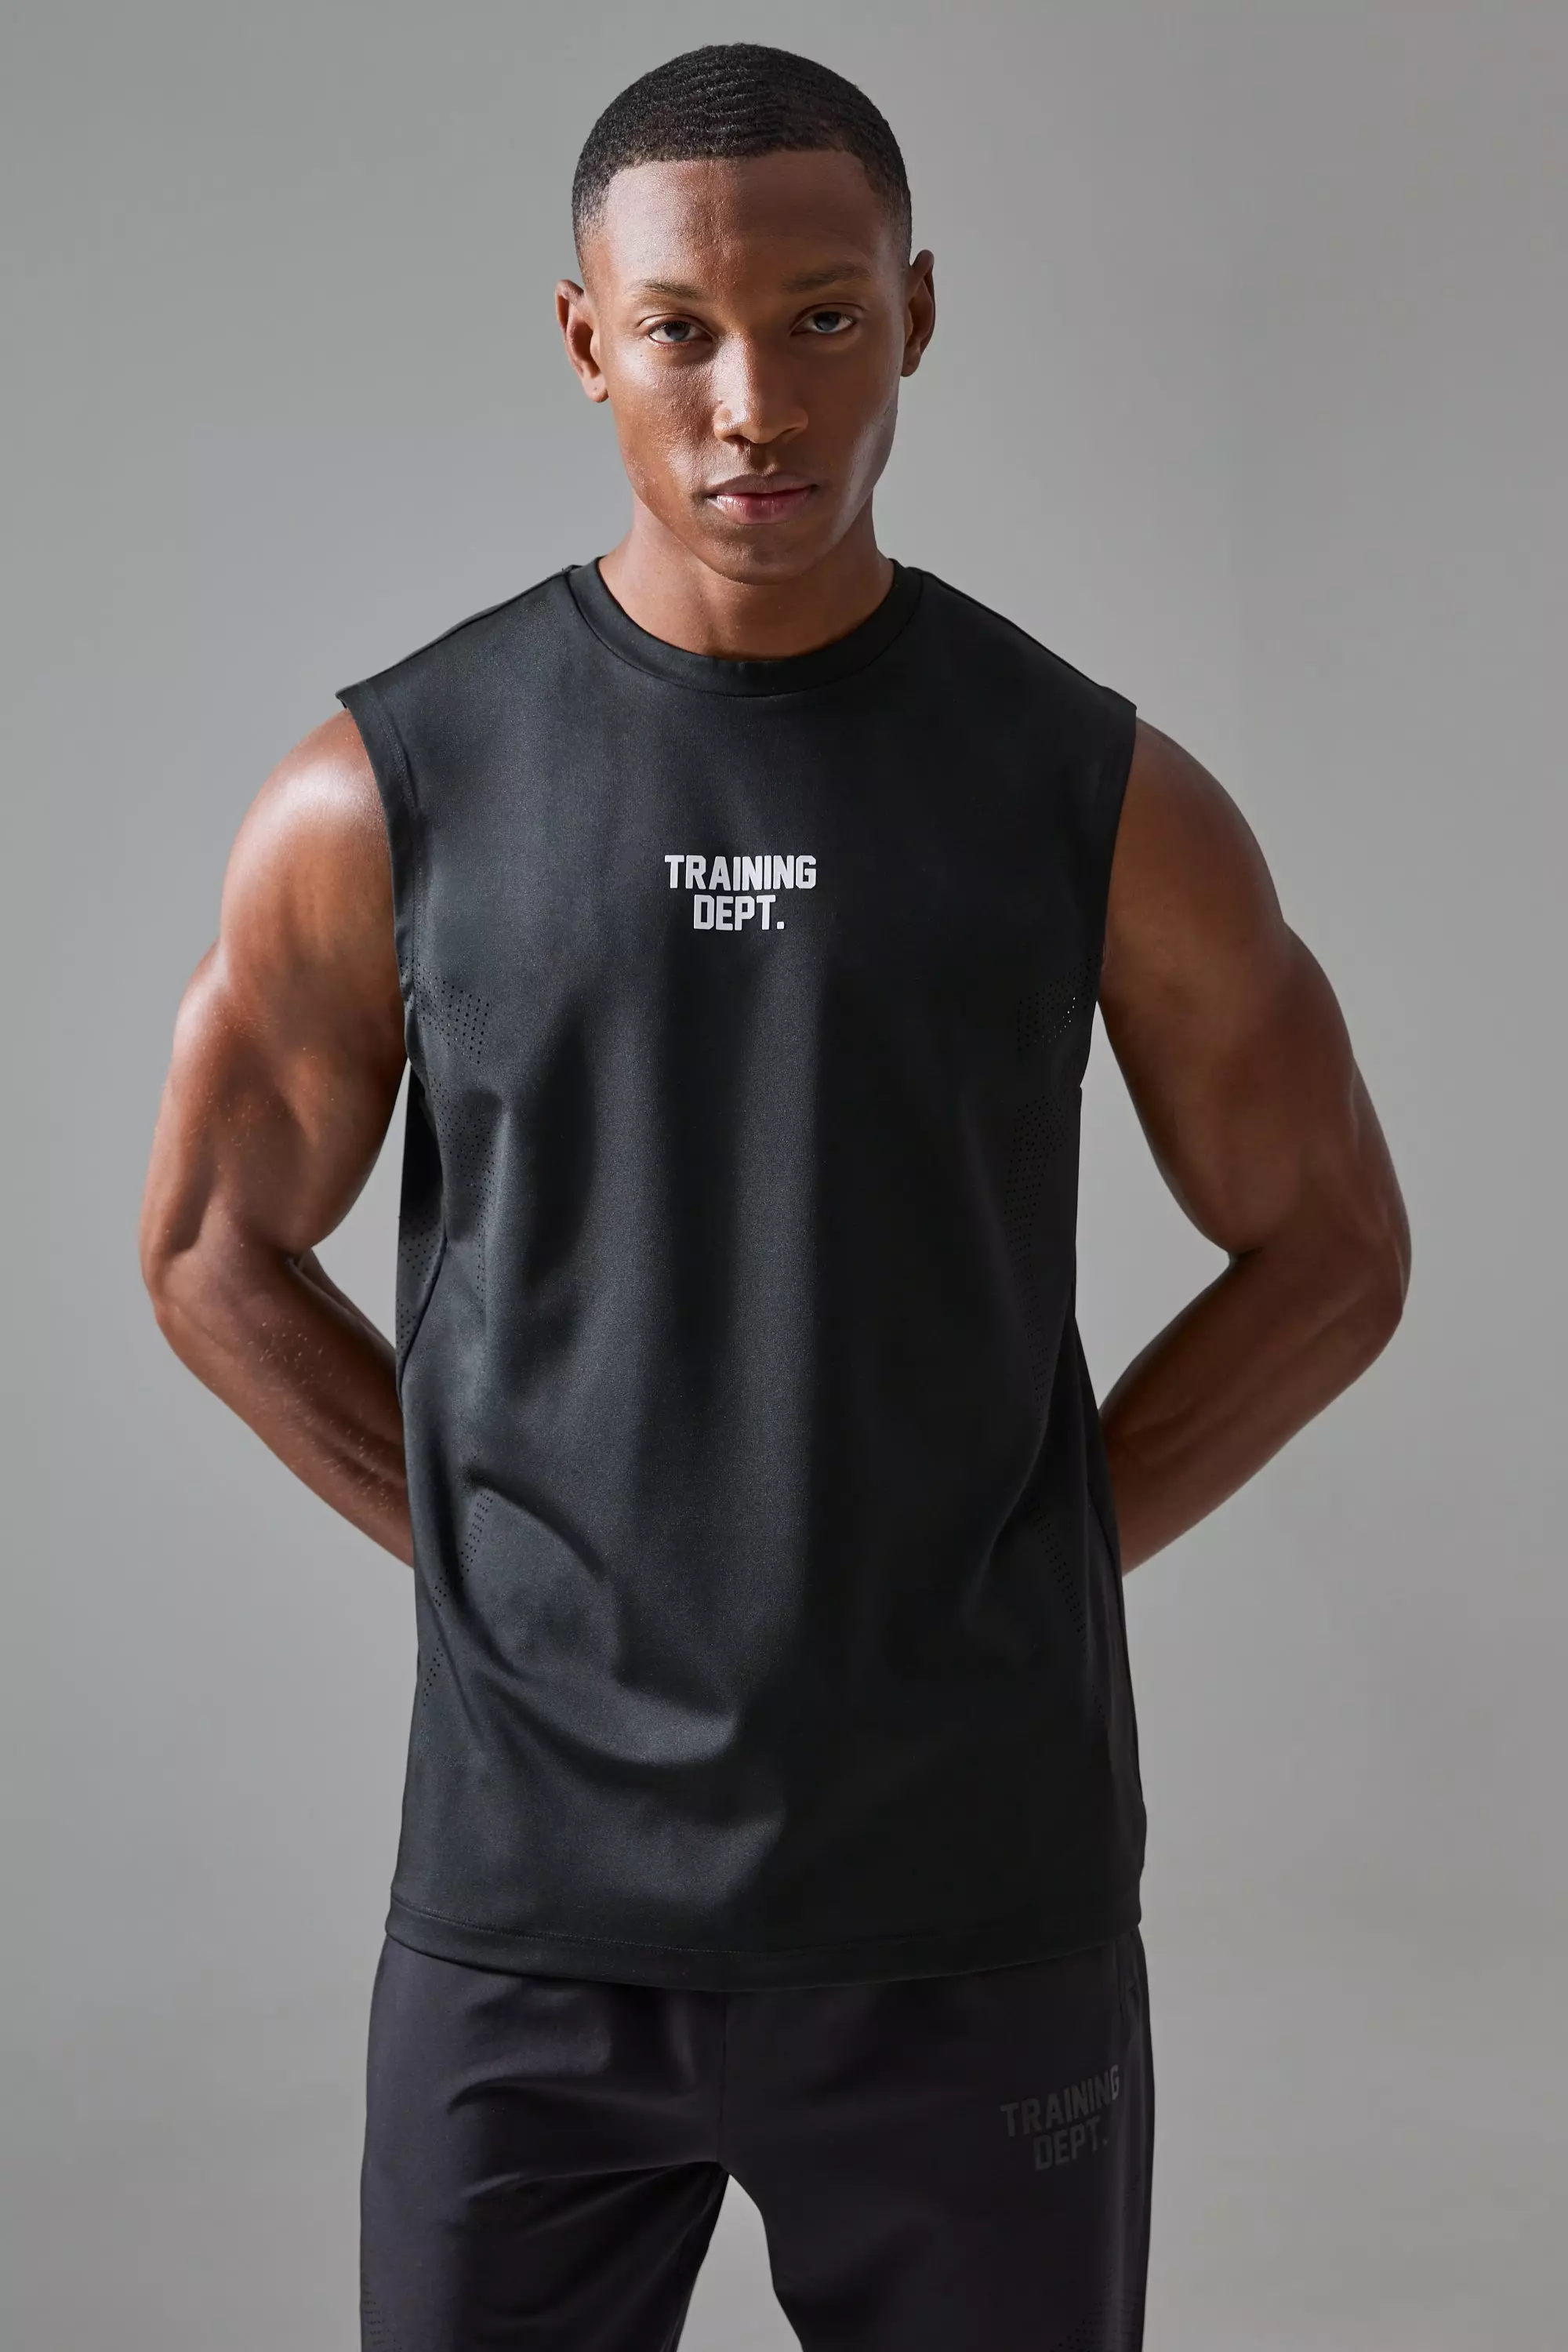 Active Training Dept Perforated Performance Tank Black